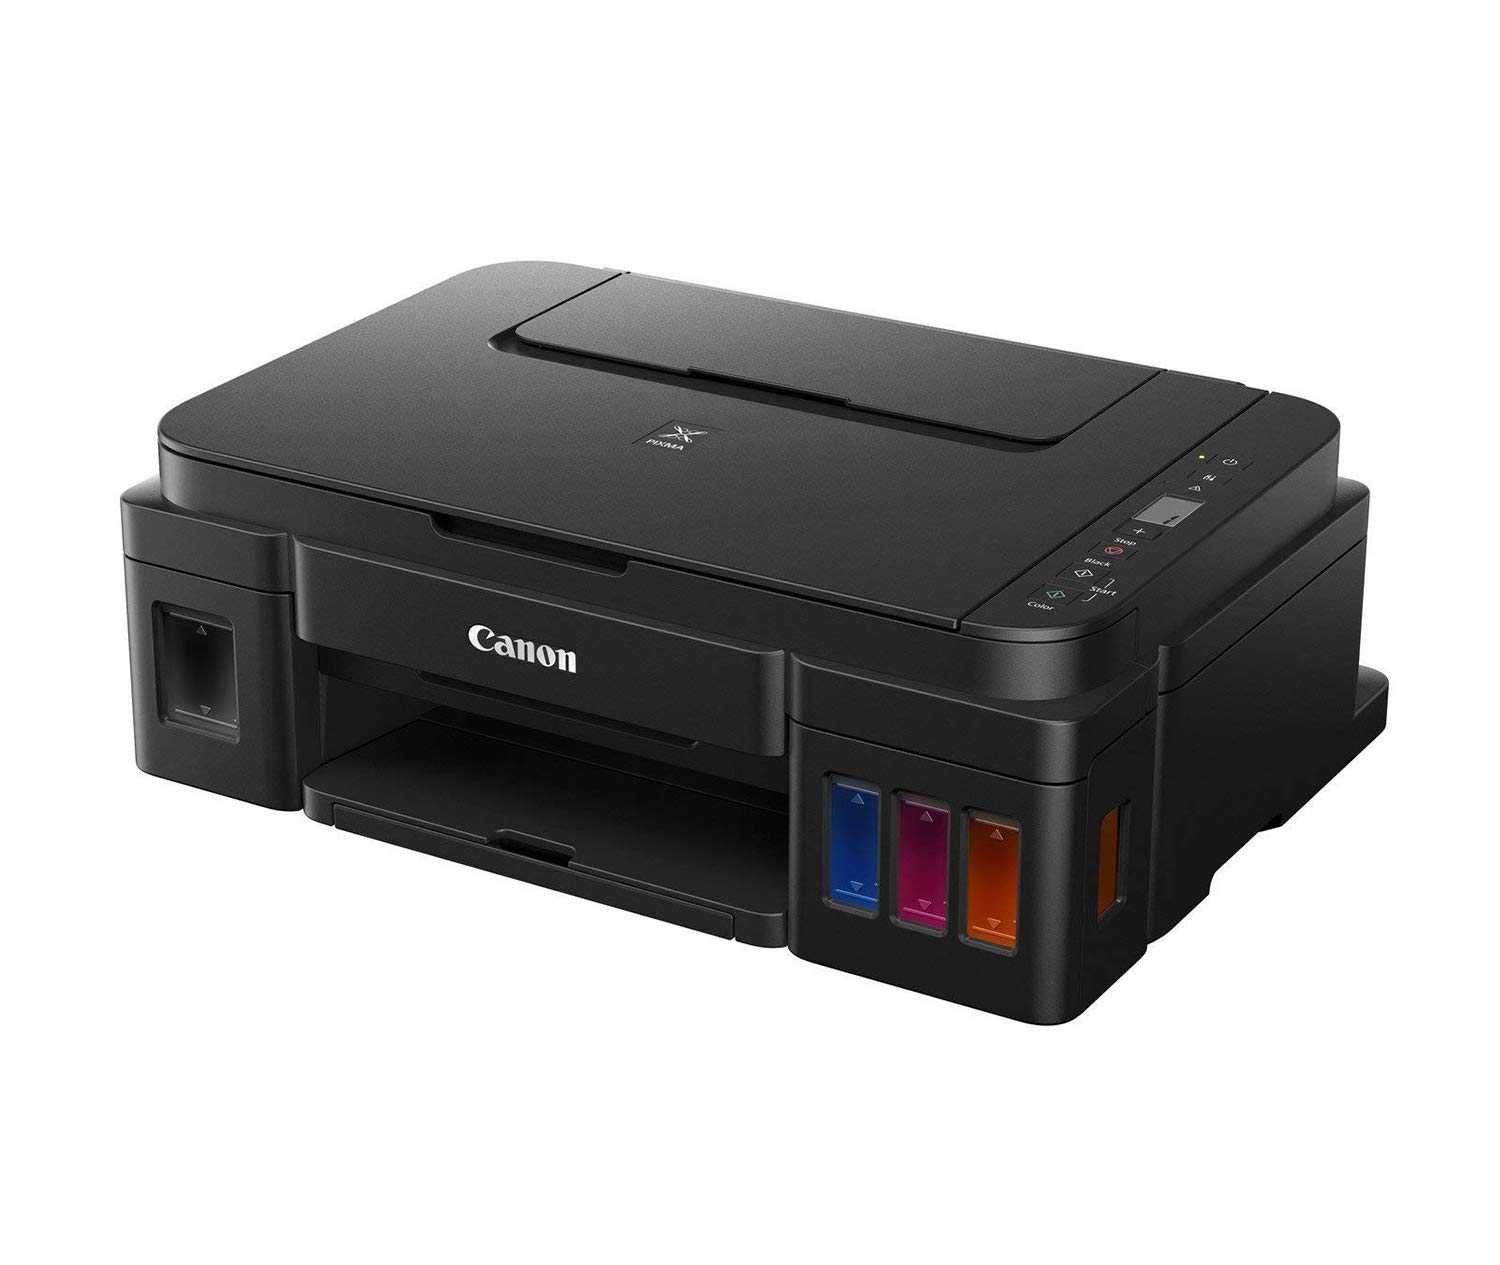 Canon Pixma G2010 All-in-One Ink Tank Colour Printer (Black)/Printer Type - Ink Tank/ Functionality - All-in-One (Print, Scan, Copy)/ Connectivity - USB/Display - LCD (1.2 inch segment mono)